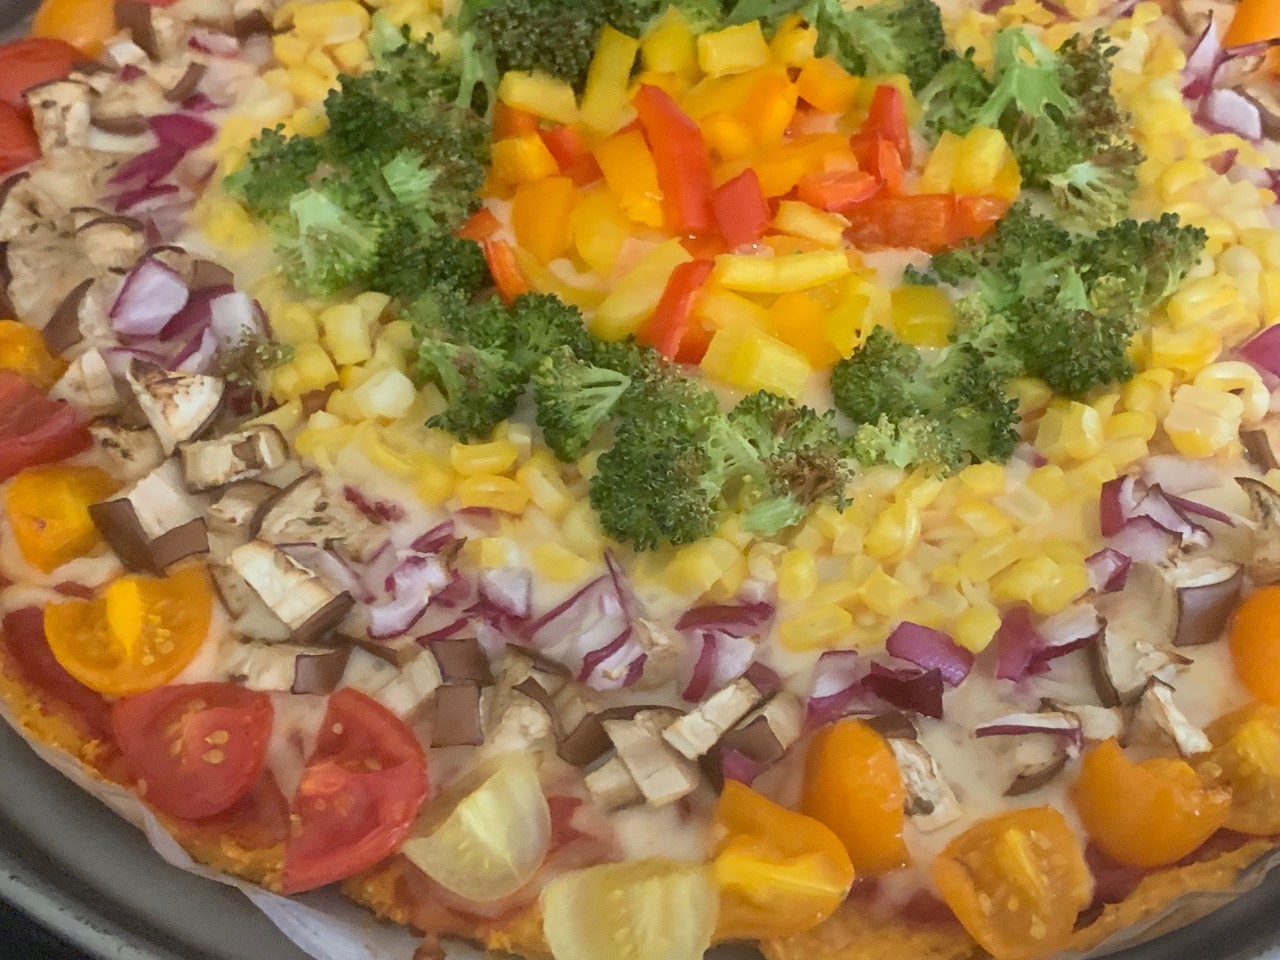 Rainbow Pizza with a sweet potato crust, bell peppers, corn, onions, butternut squash, eggplant, and broccoli